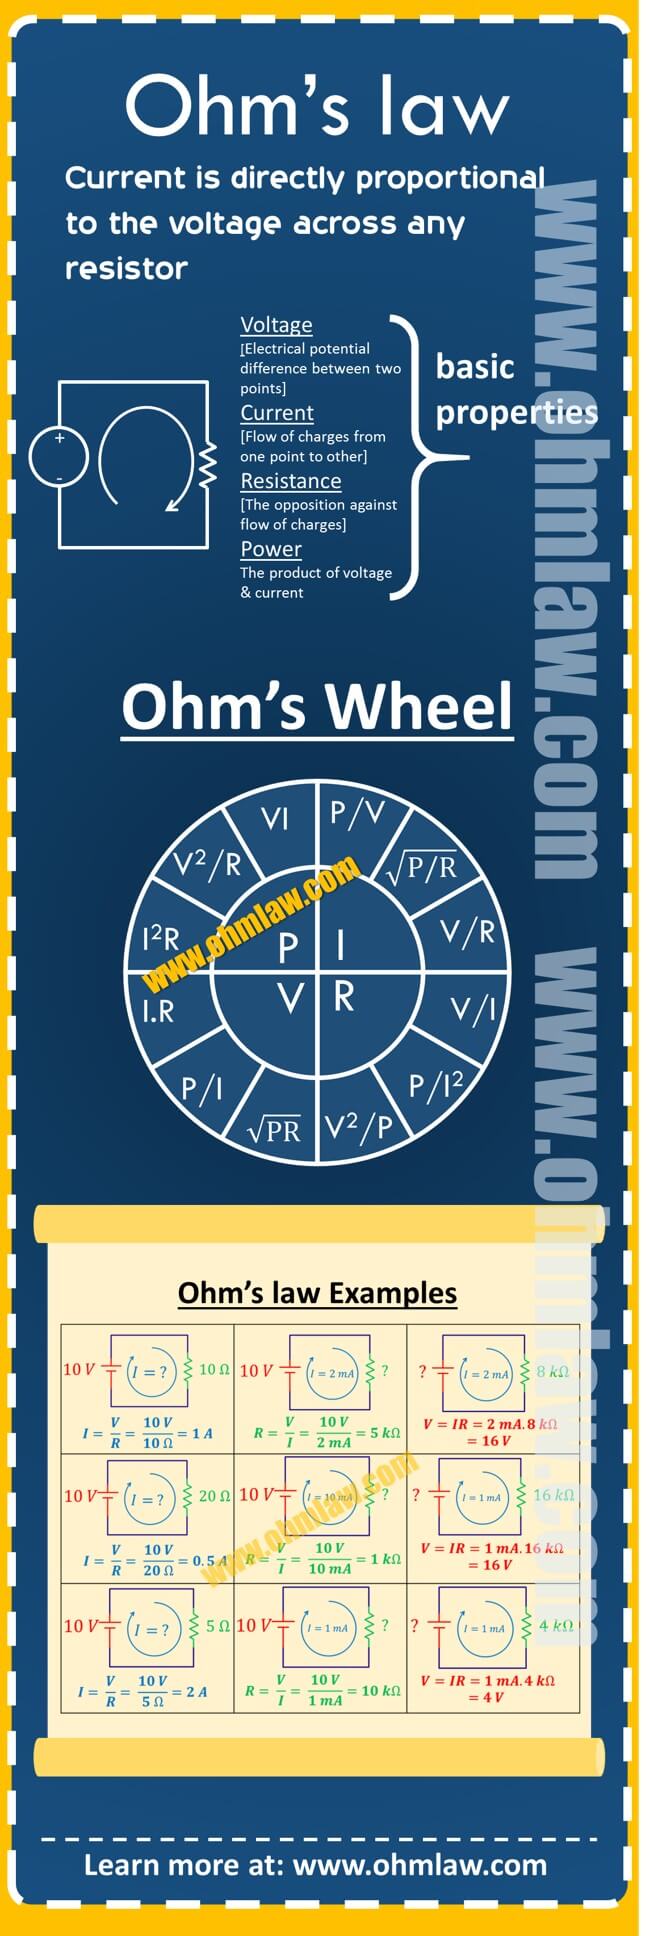 ohms-law-infographic